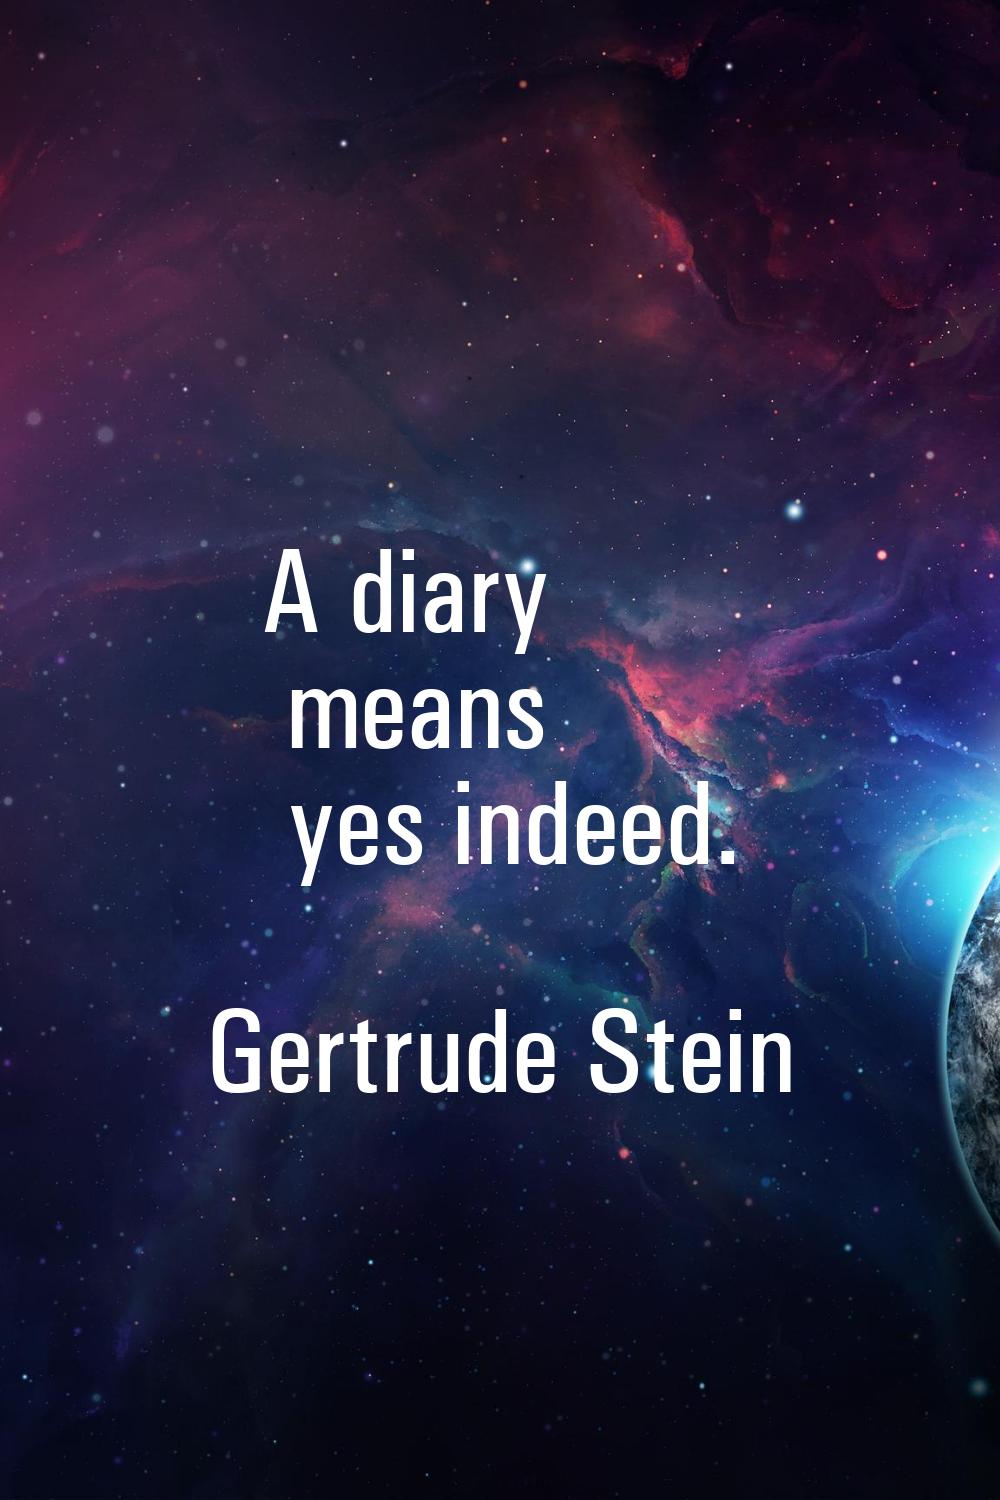 A diary means yes indeed.